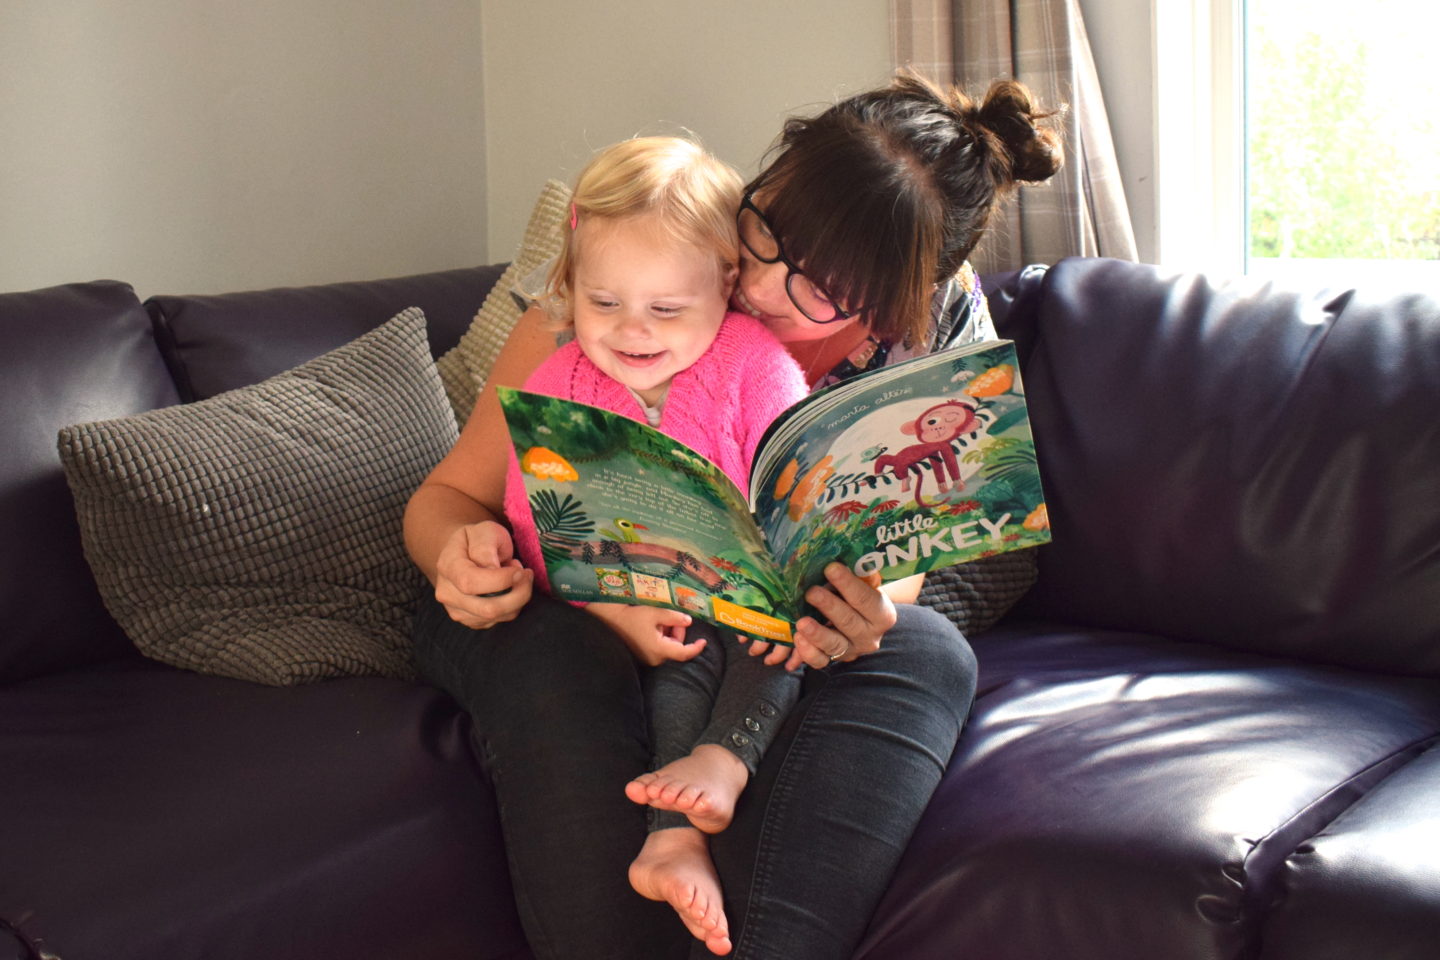 mother laughing with one year old on her lap, during time to read